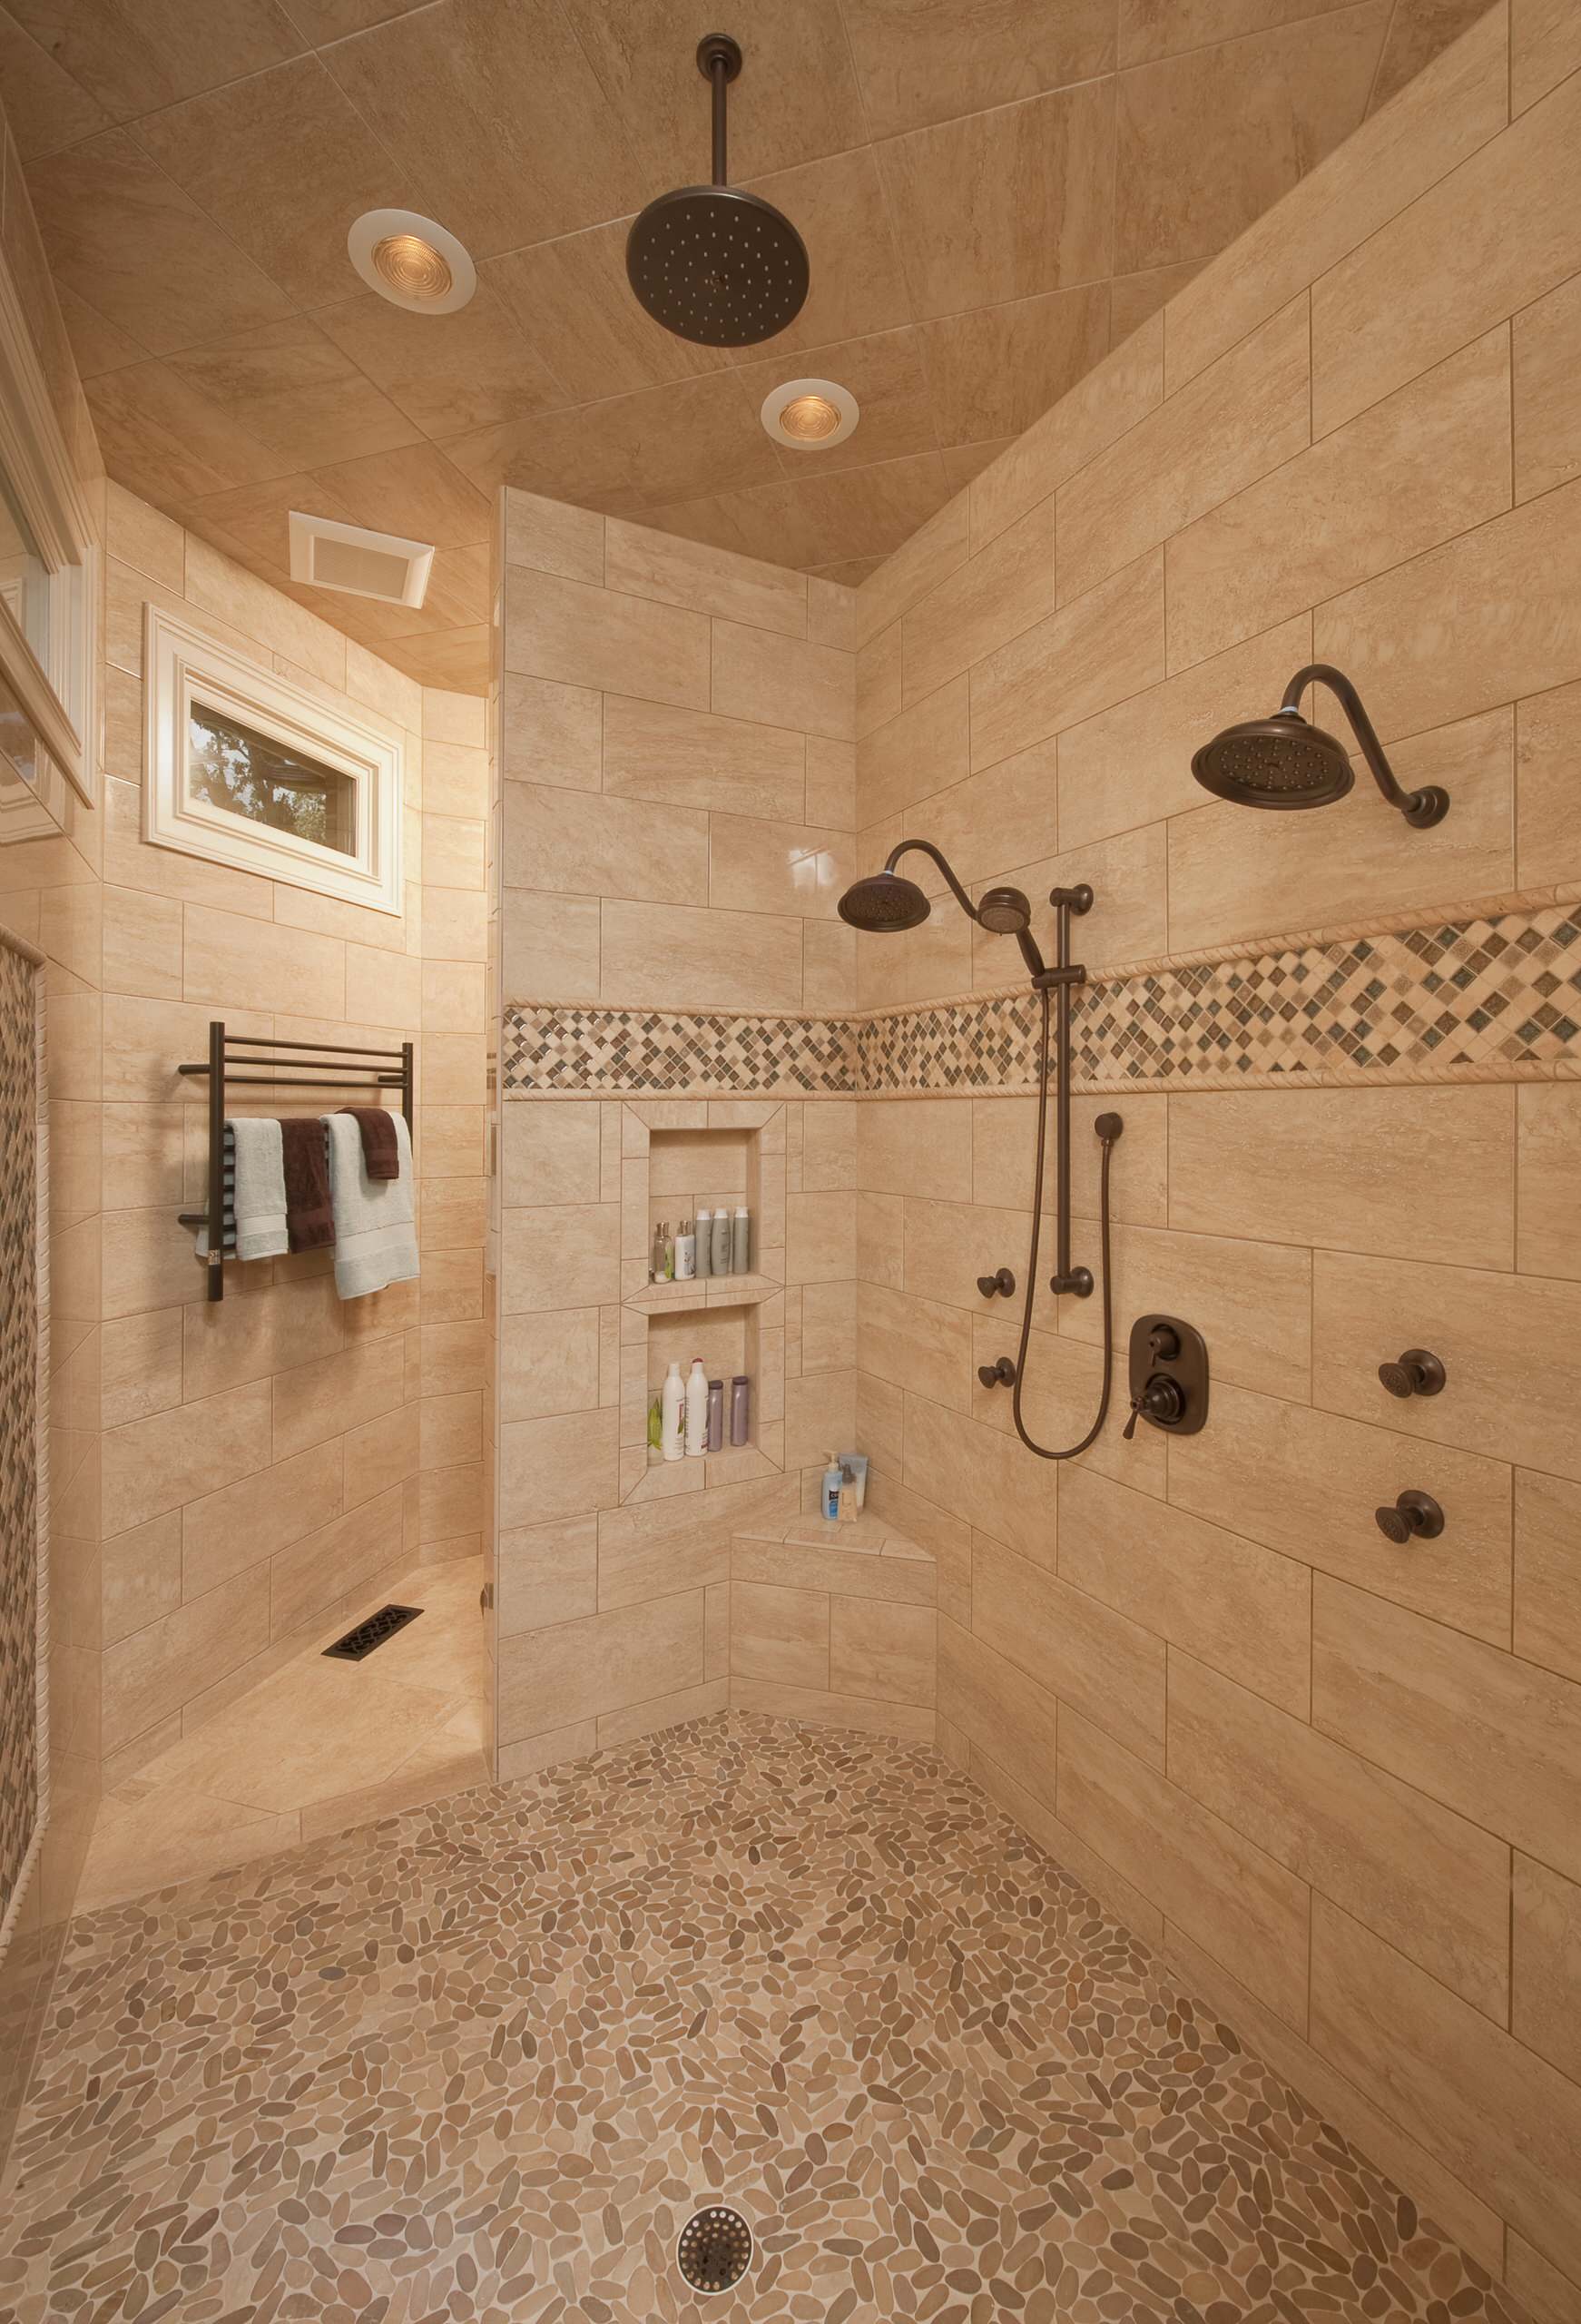 Bathroom Glass Shower With Door Tile Two Shower Heads Stock Photo